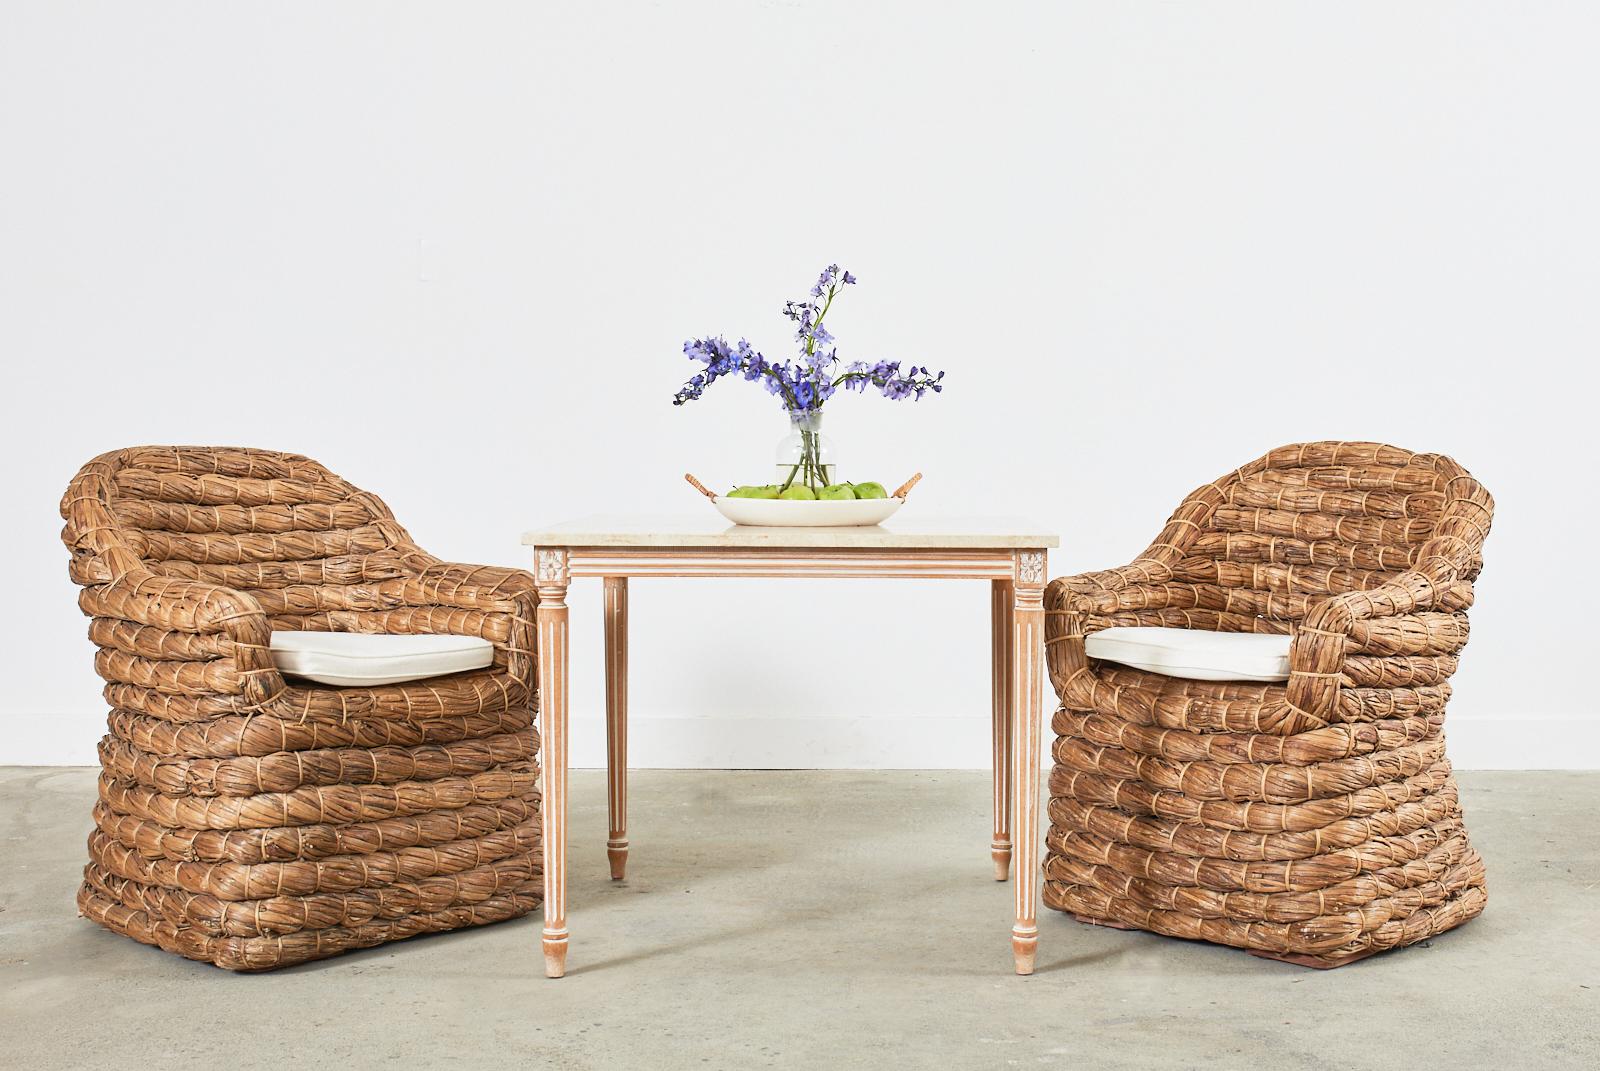 Rare set of four 20th century organic modern dining chairs designed by Ralph Lauren known as Joshua Tree chairs. They feature a rattan frame wrapped with an abaca hemp style rope. The thick braids are crafted from leaves that are woven together to